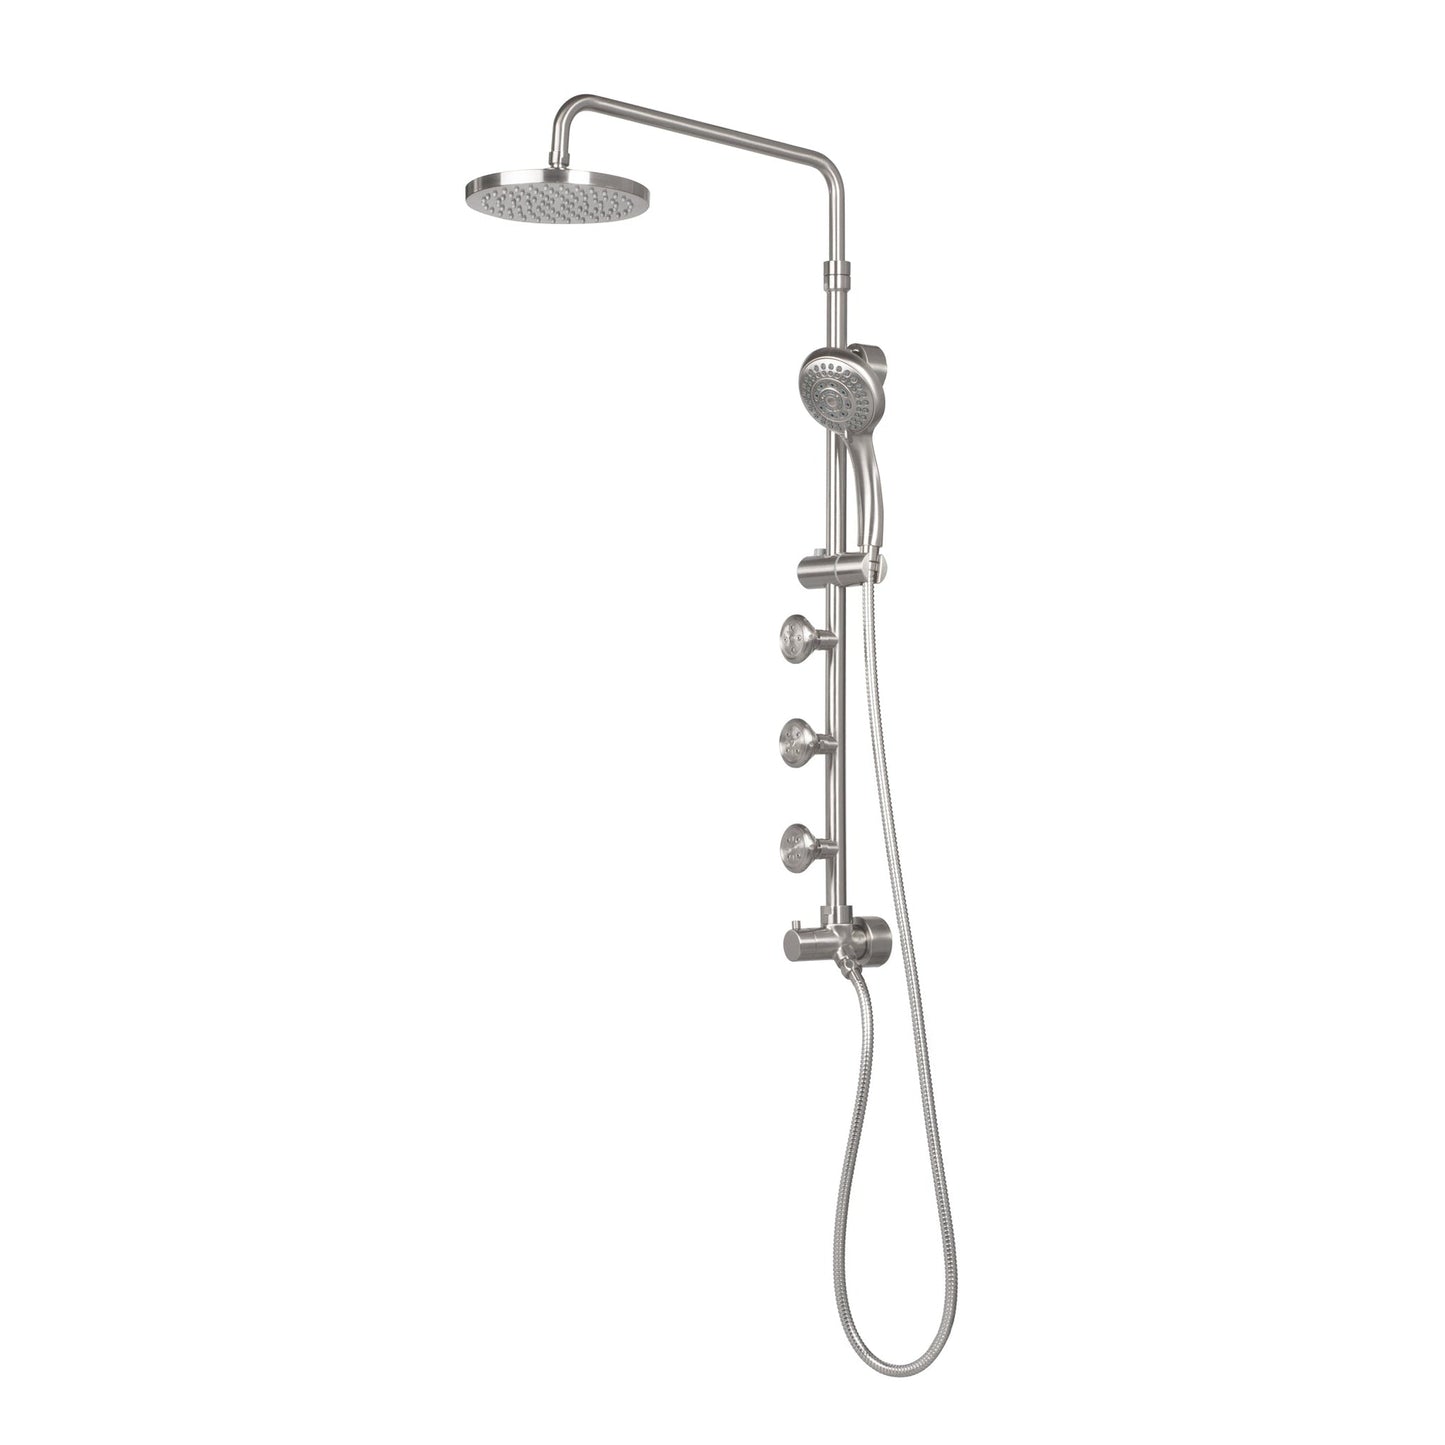 PULSE ShowerSpas Lanikai 2.5 GPM Rain Shower System in Brushed Nickel Finish With 3-Power Spray Body Jet and 5-Function Hand Shower